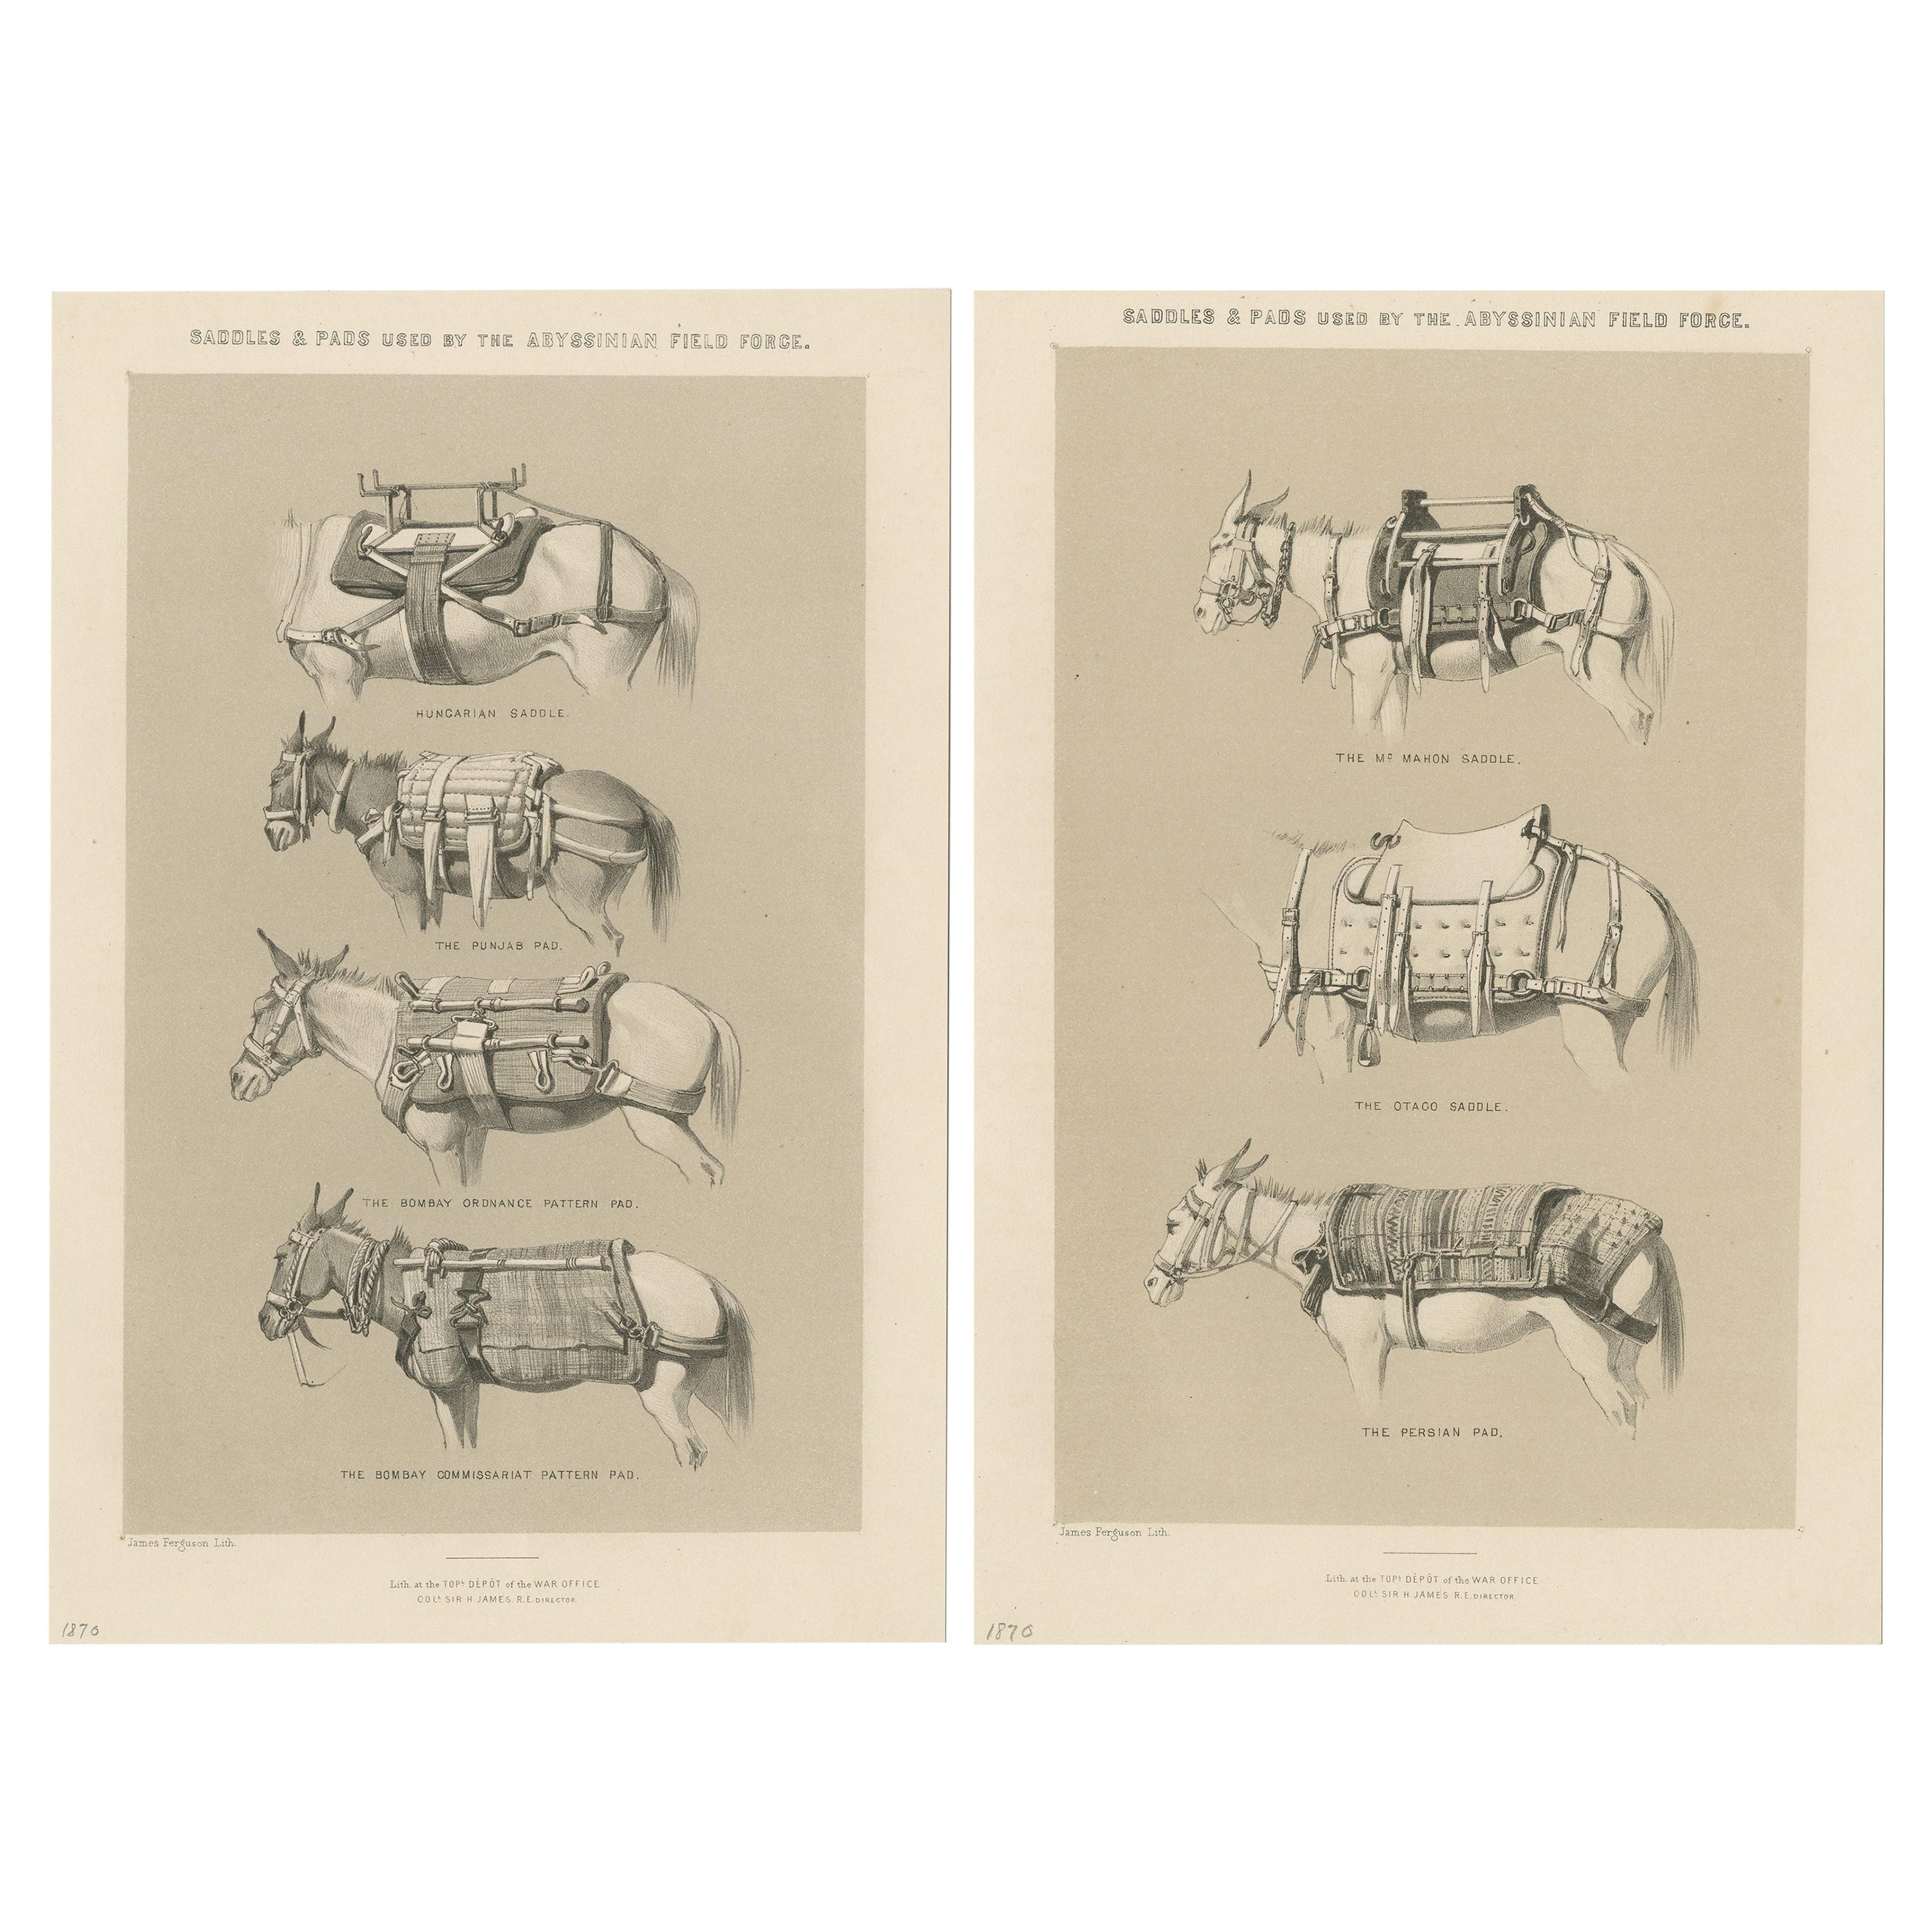 Set of Two Antique Prints of Saddles and Pads Used by the Field Force, 1870